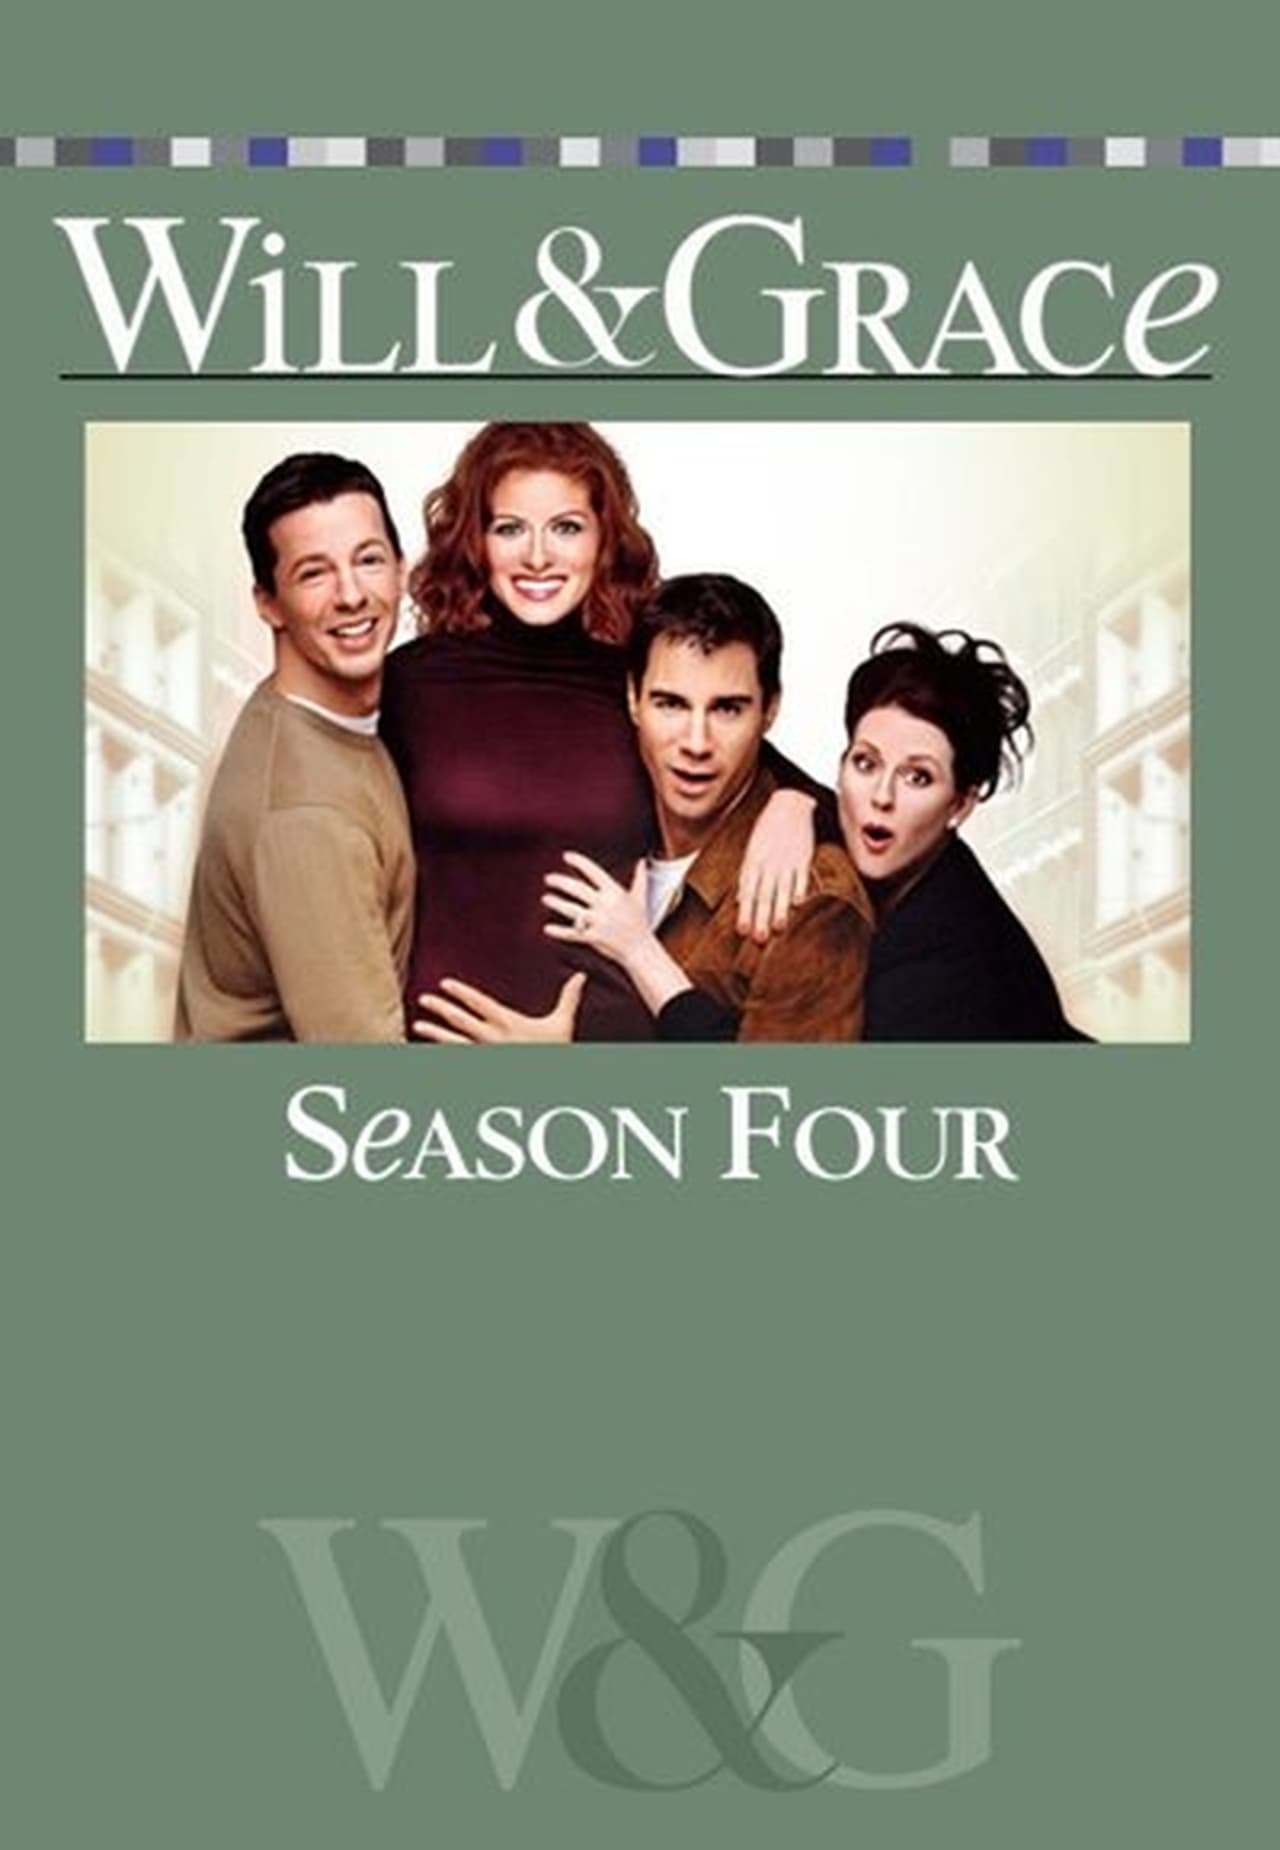 Image Will y Grace (1998)